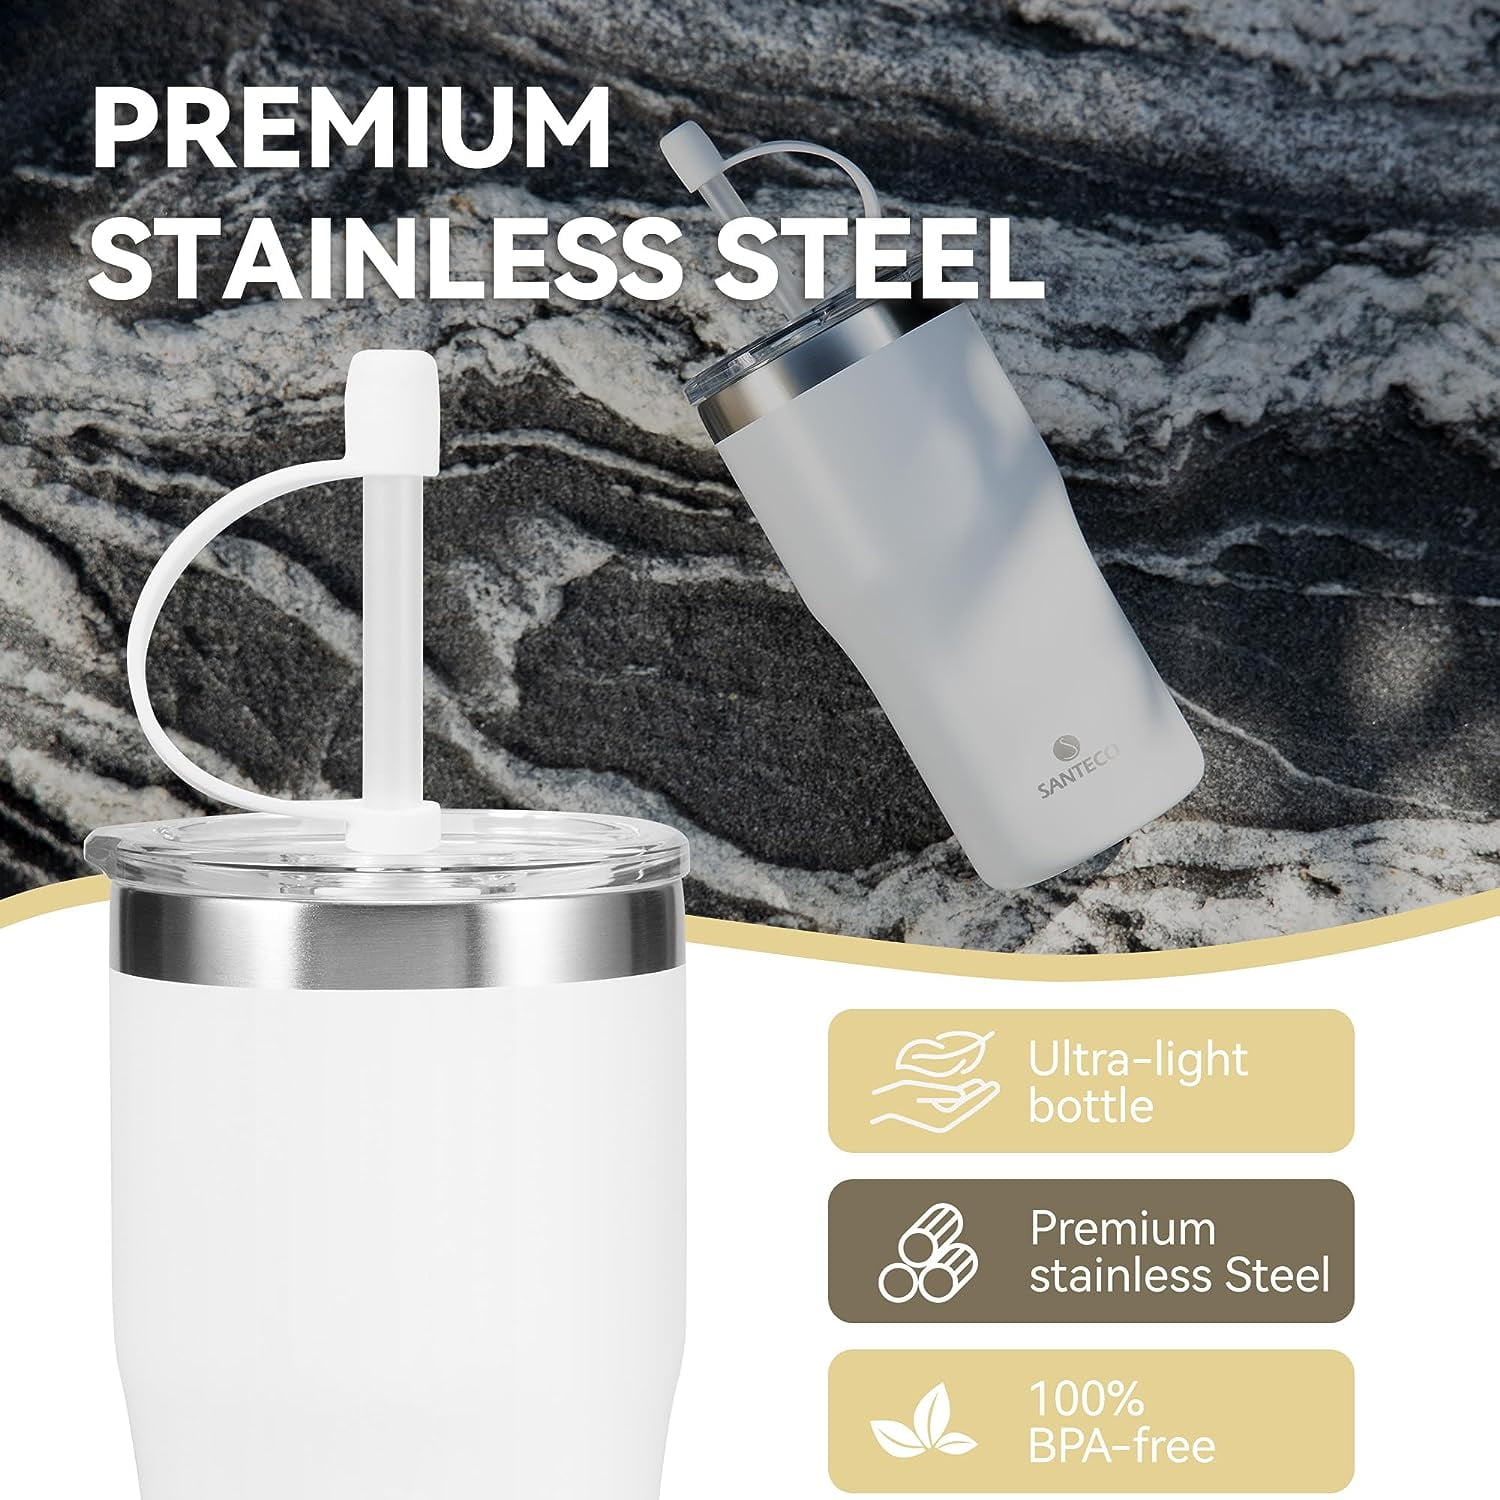 Steel Shine Tumbler: Bottle Opener With Can Cooler Sleeve, Double Walled  Vacuum Insulated Drink Holder For Slim Beer & Seltzer Durable Stainless  Steel Design. From Toysmall666, $6.16